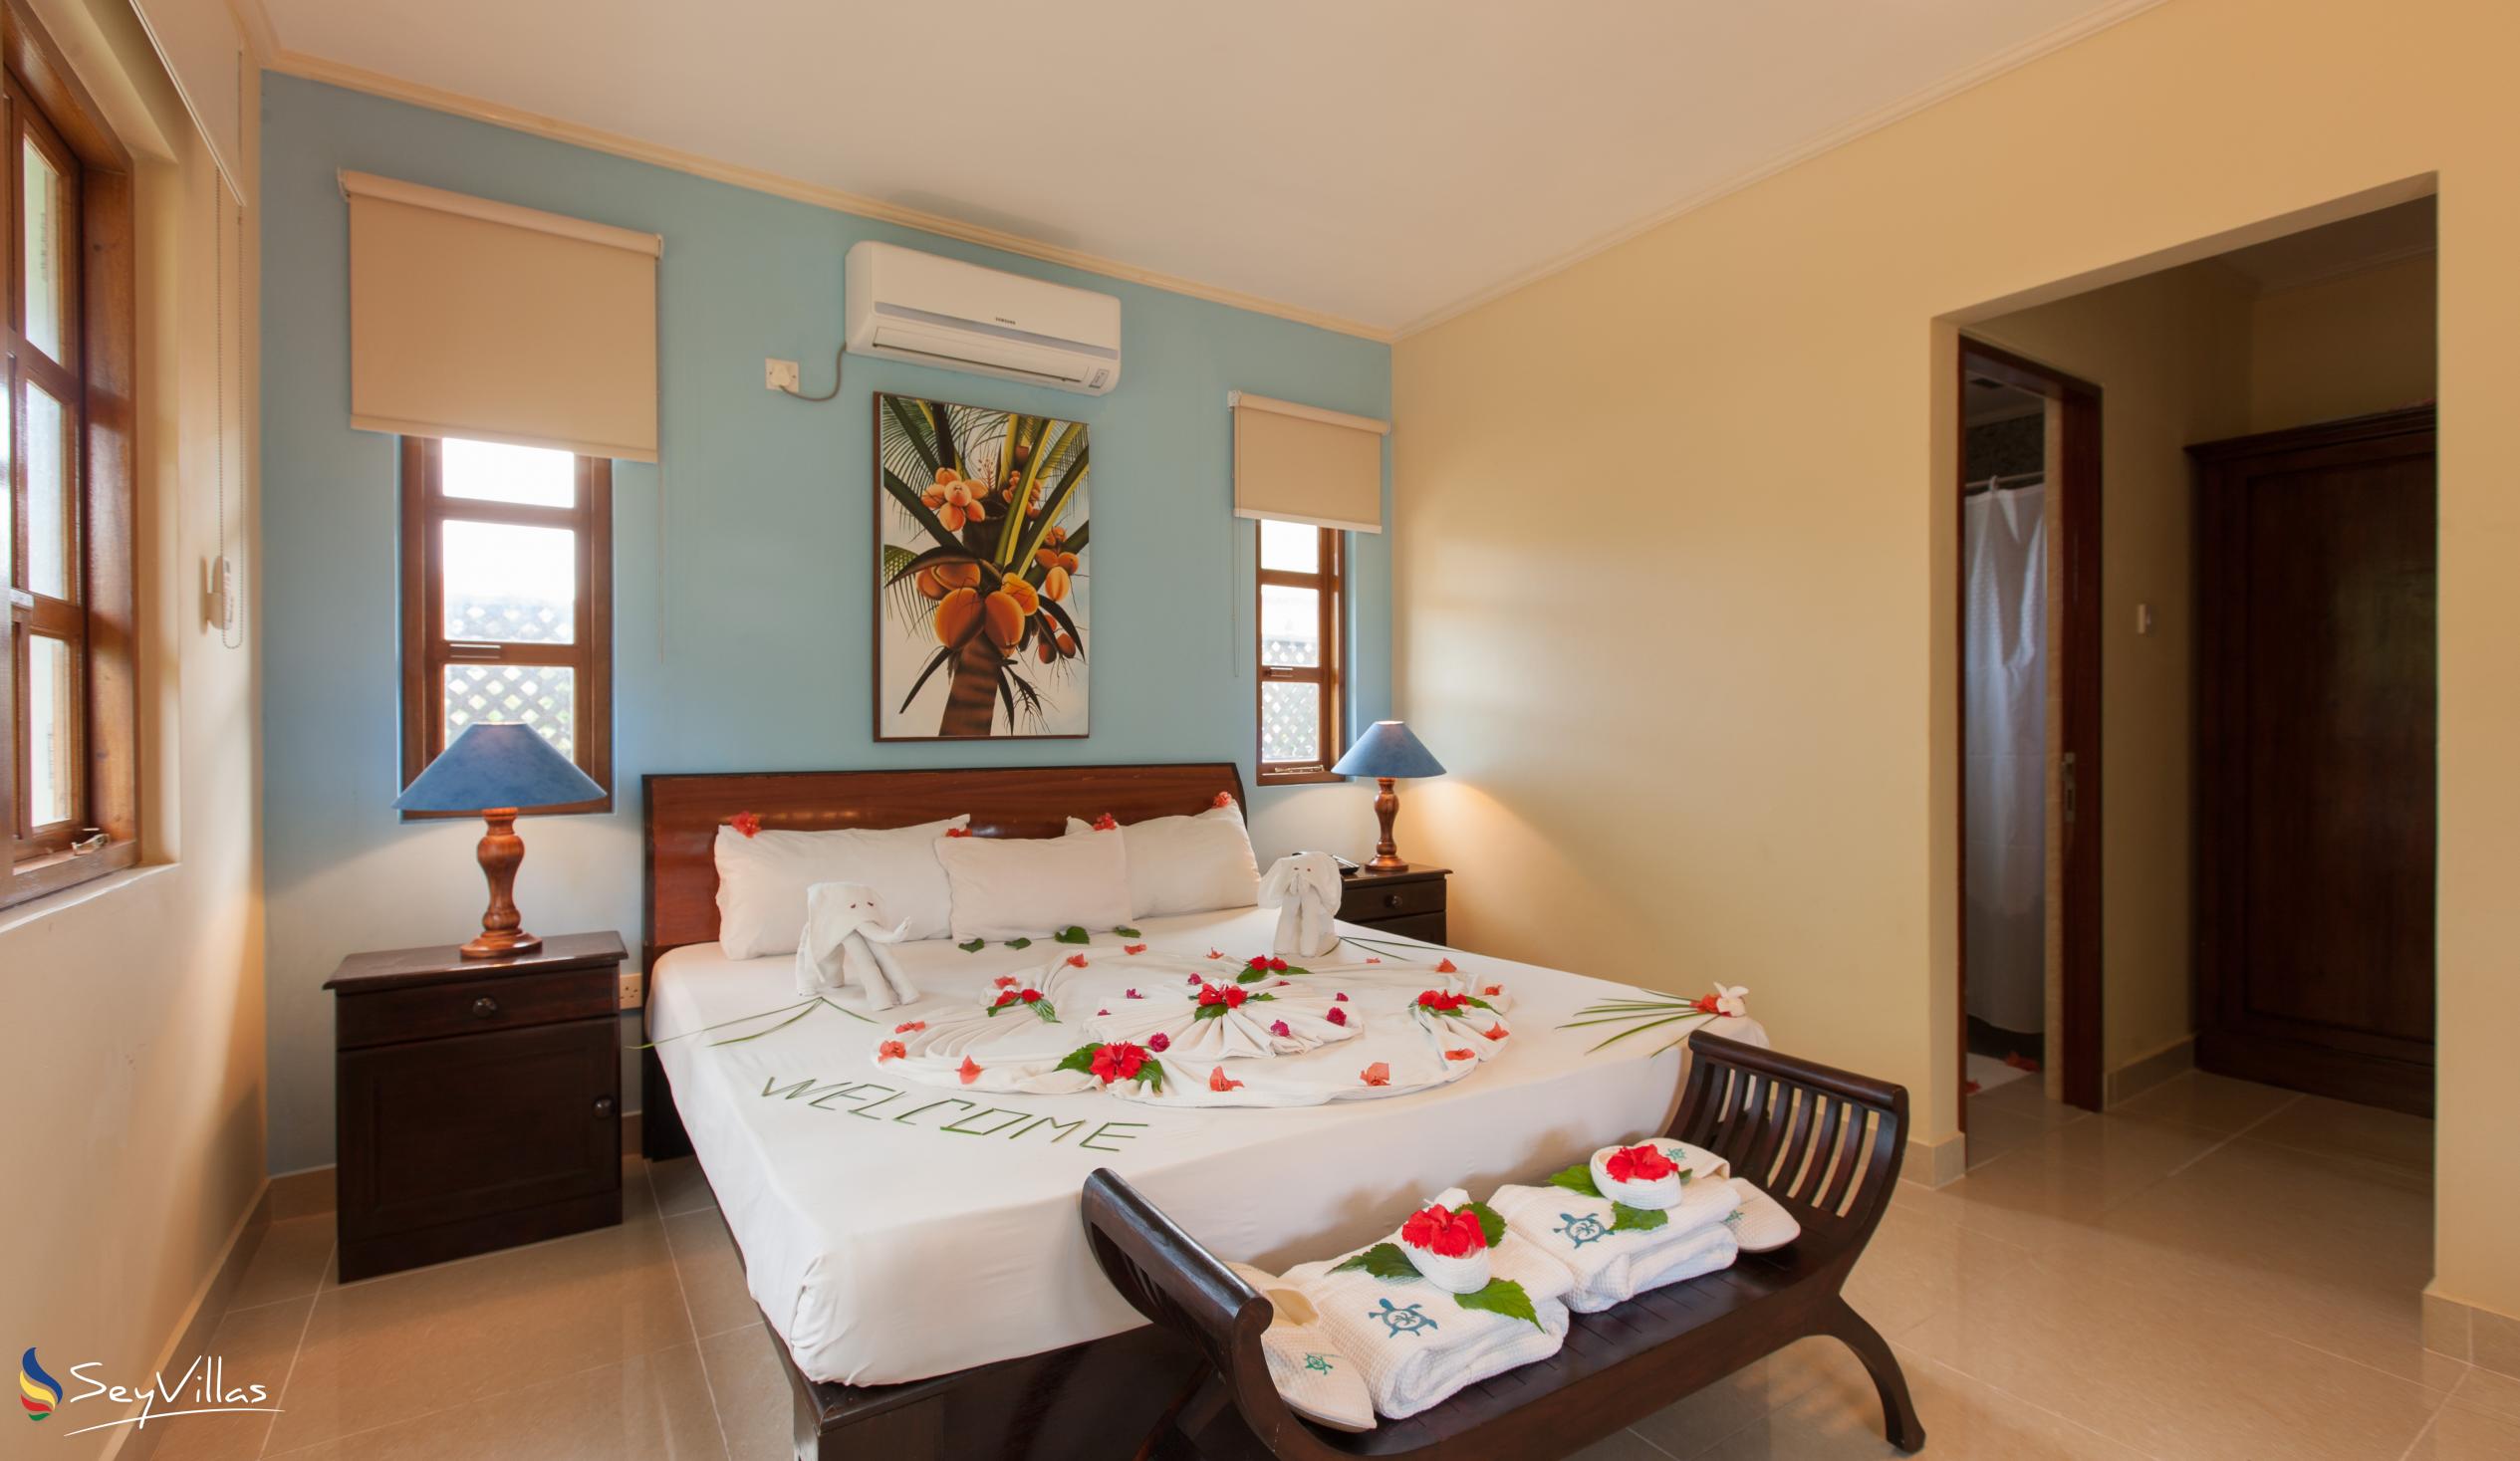 Photo 33: Le Relax Self Catering - Deluxe Apartment - La Digue (Seychelles)